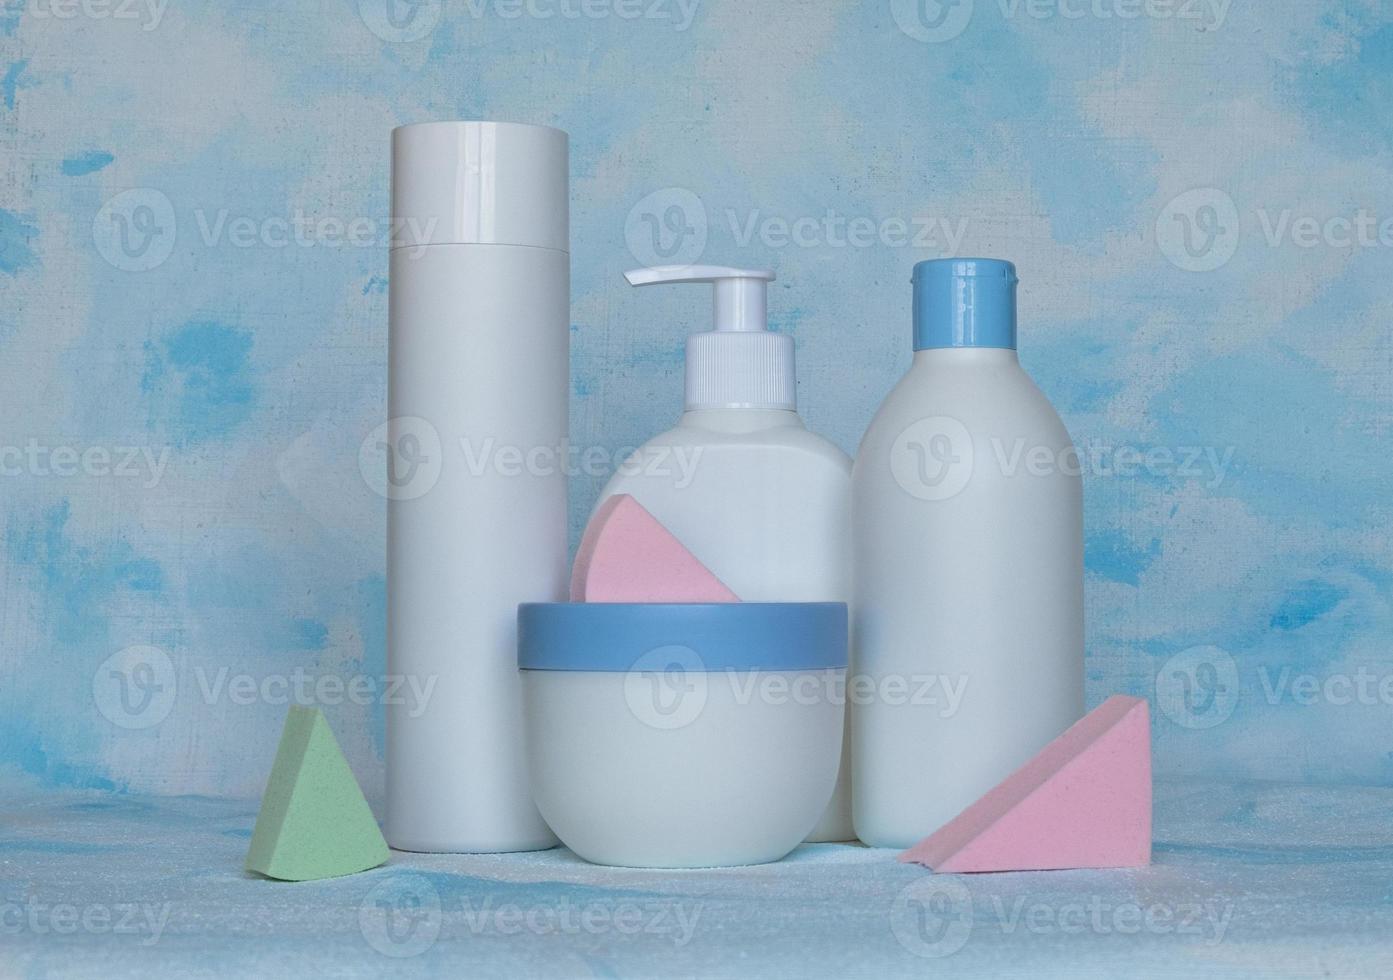 Bottles for cosmetic products without a label. Facial skin care concept. Background texture. Sponges for makeup photo